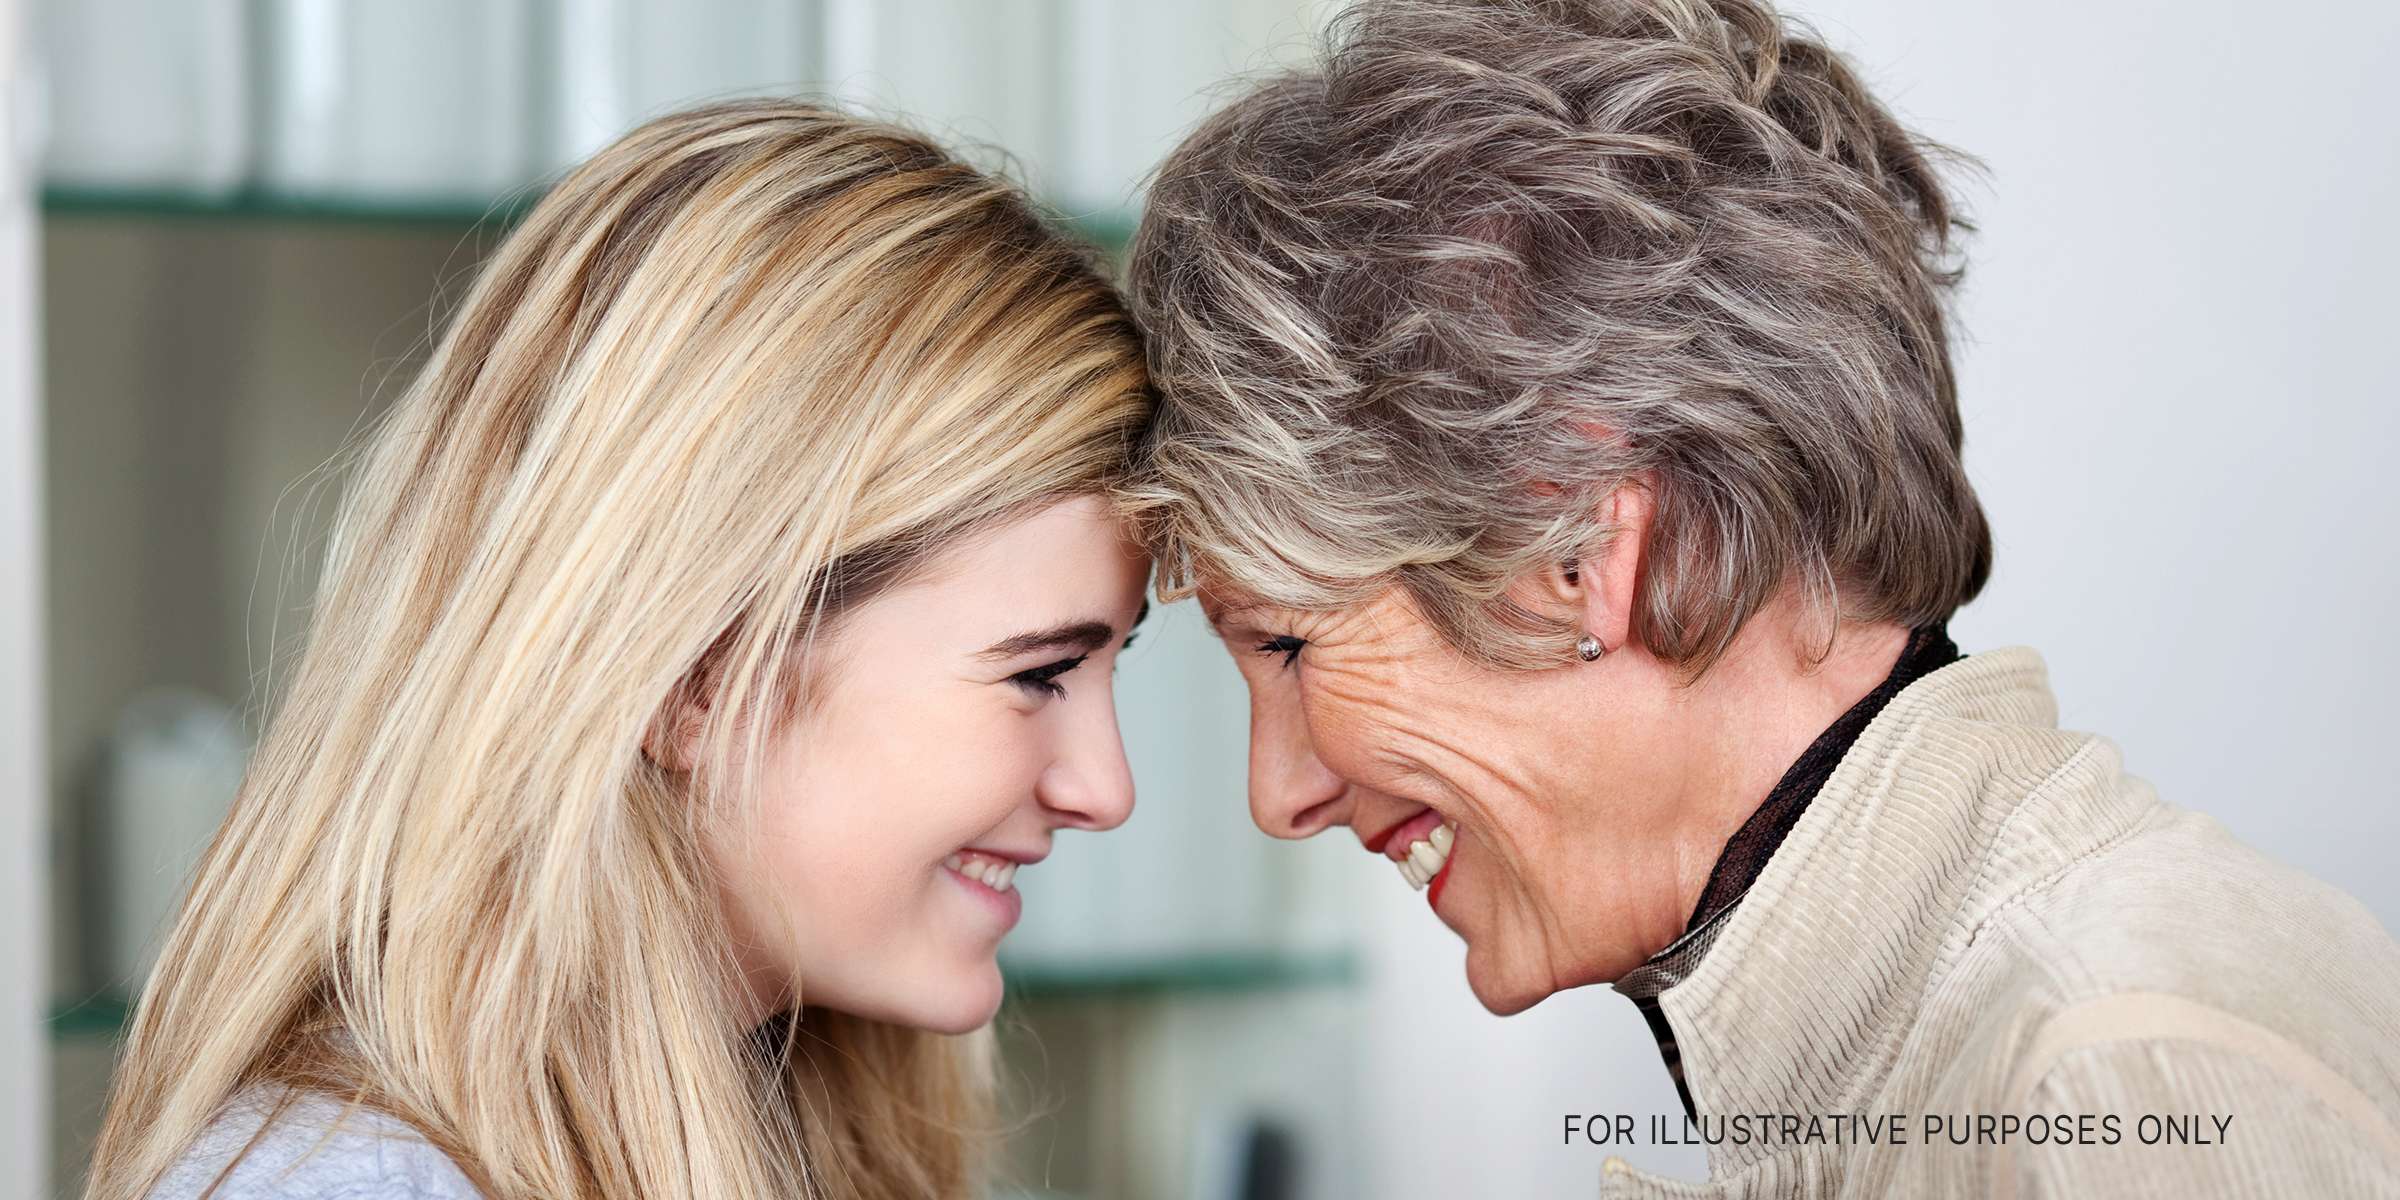 Happy granddaughter and grandmother | Source: Shutterstock